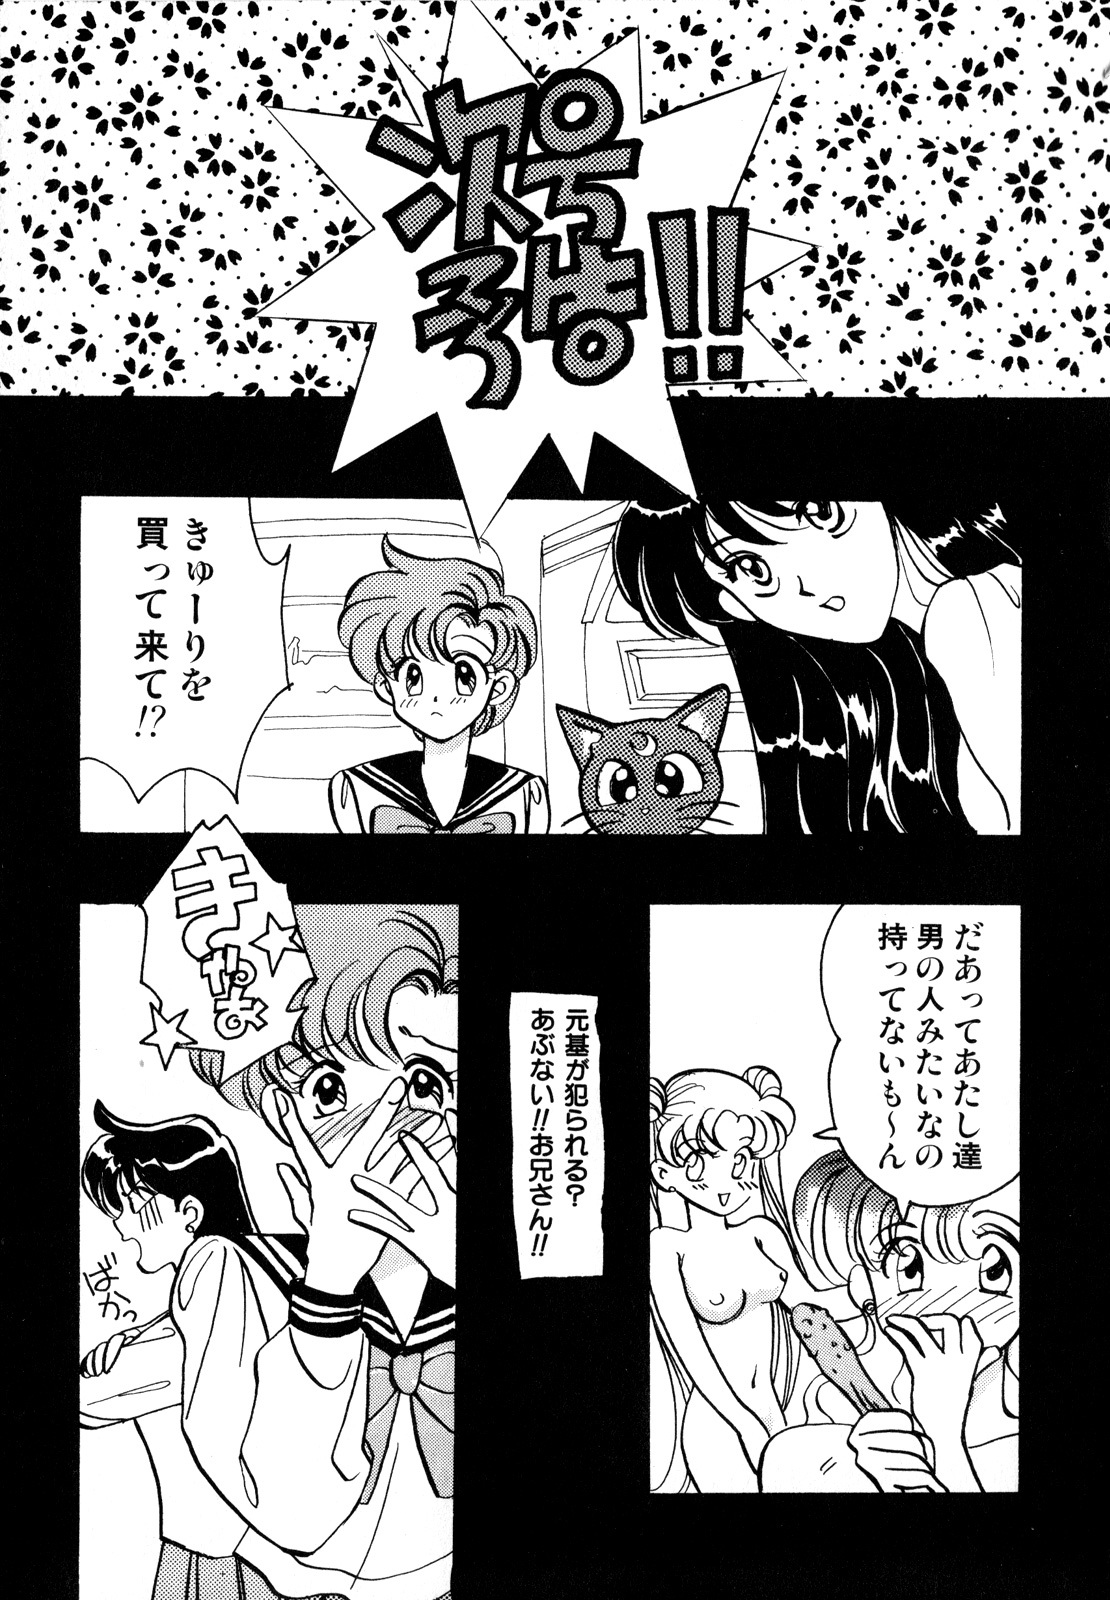 [Anthology] Lunatic Party 2 (Sailor Moon) page 22 full